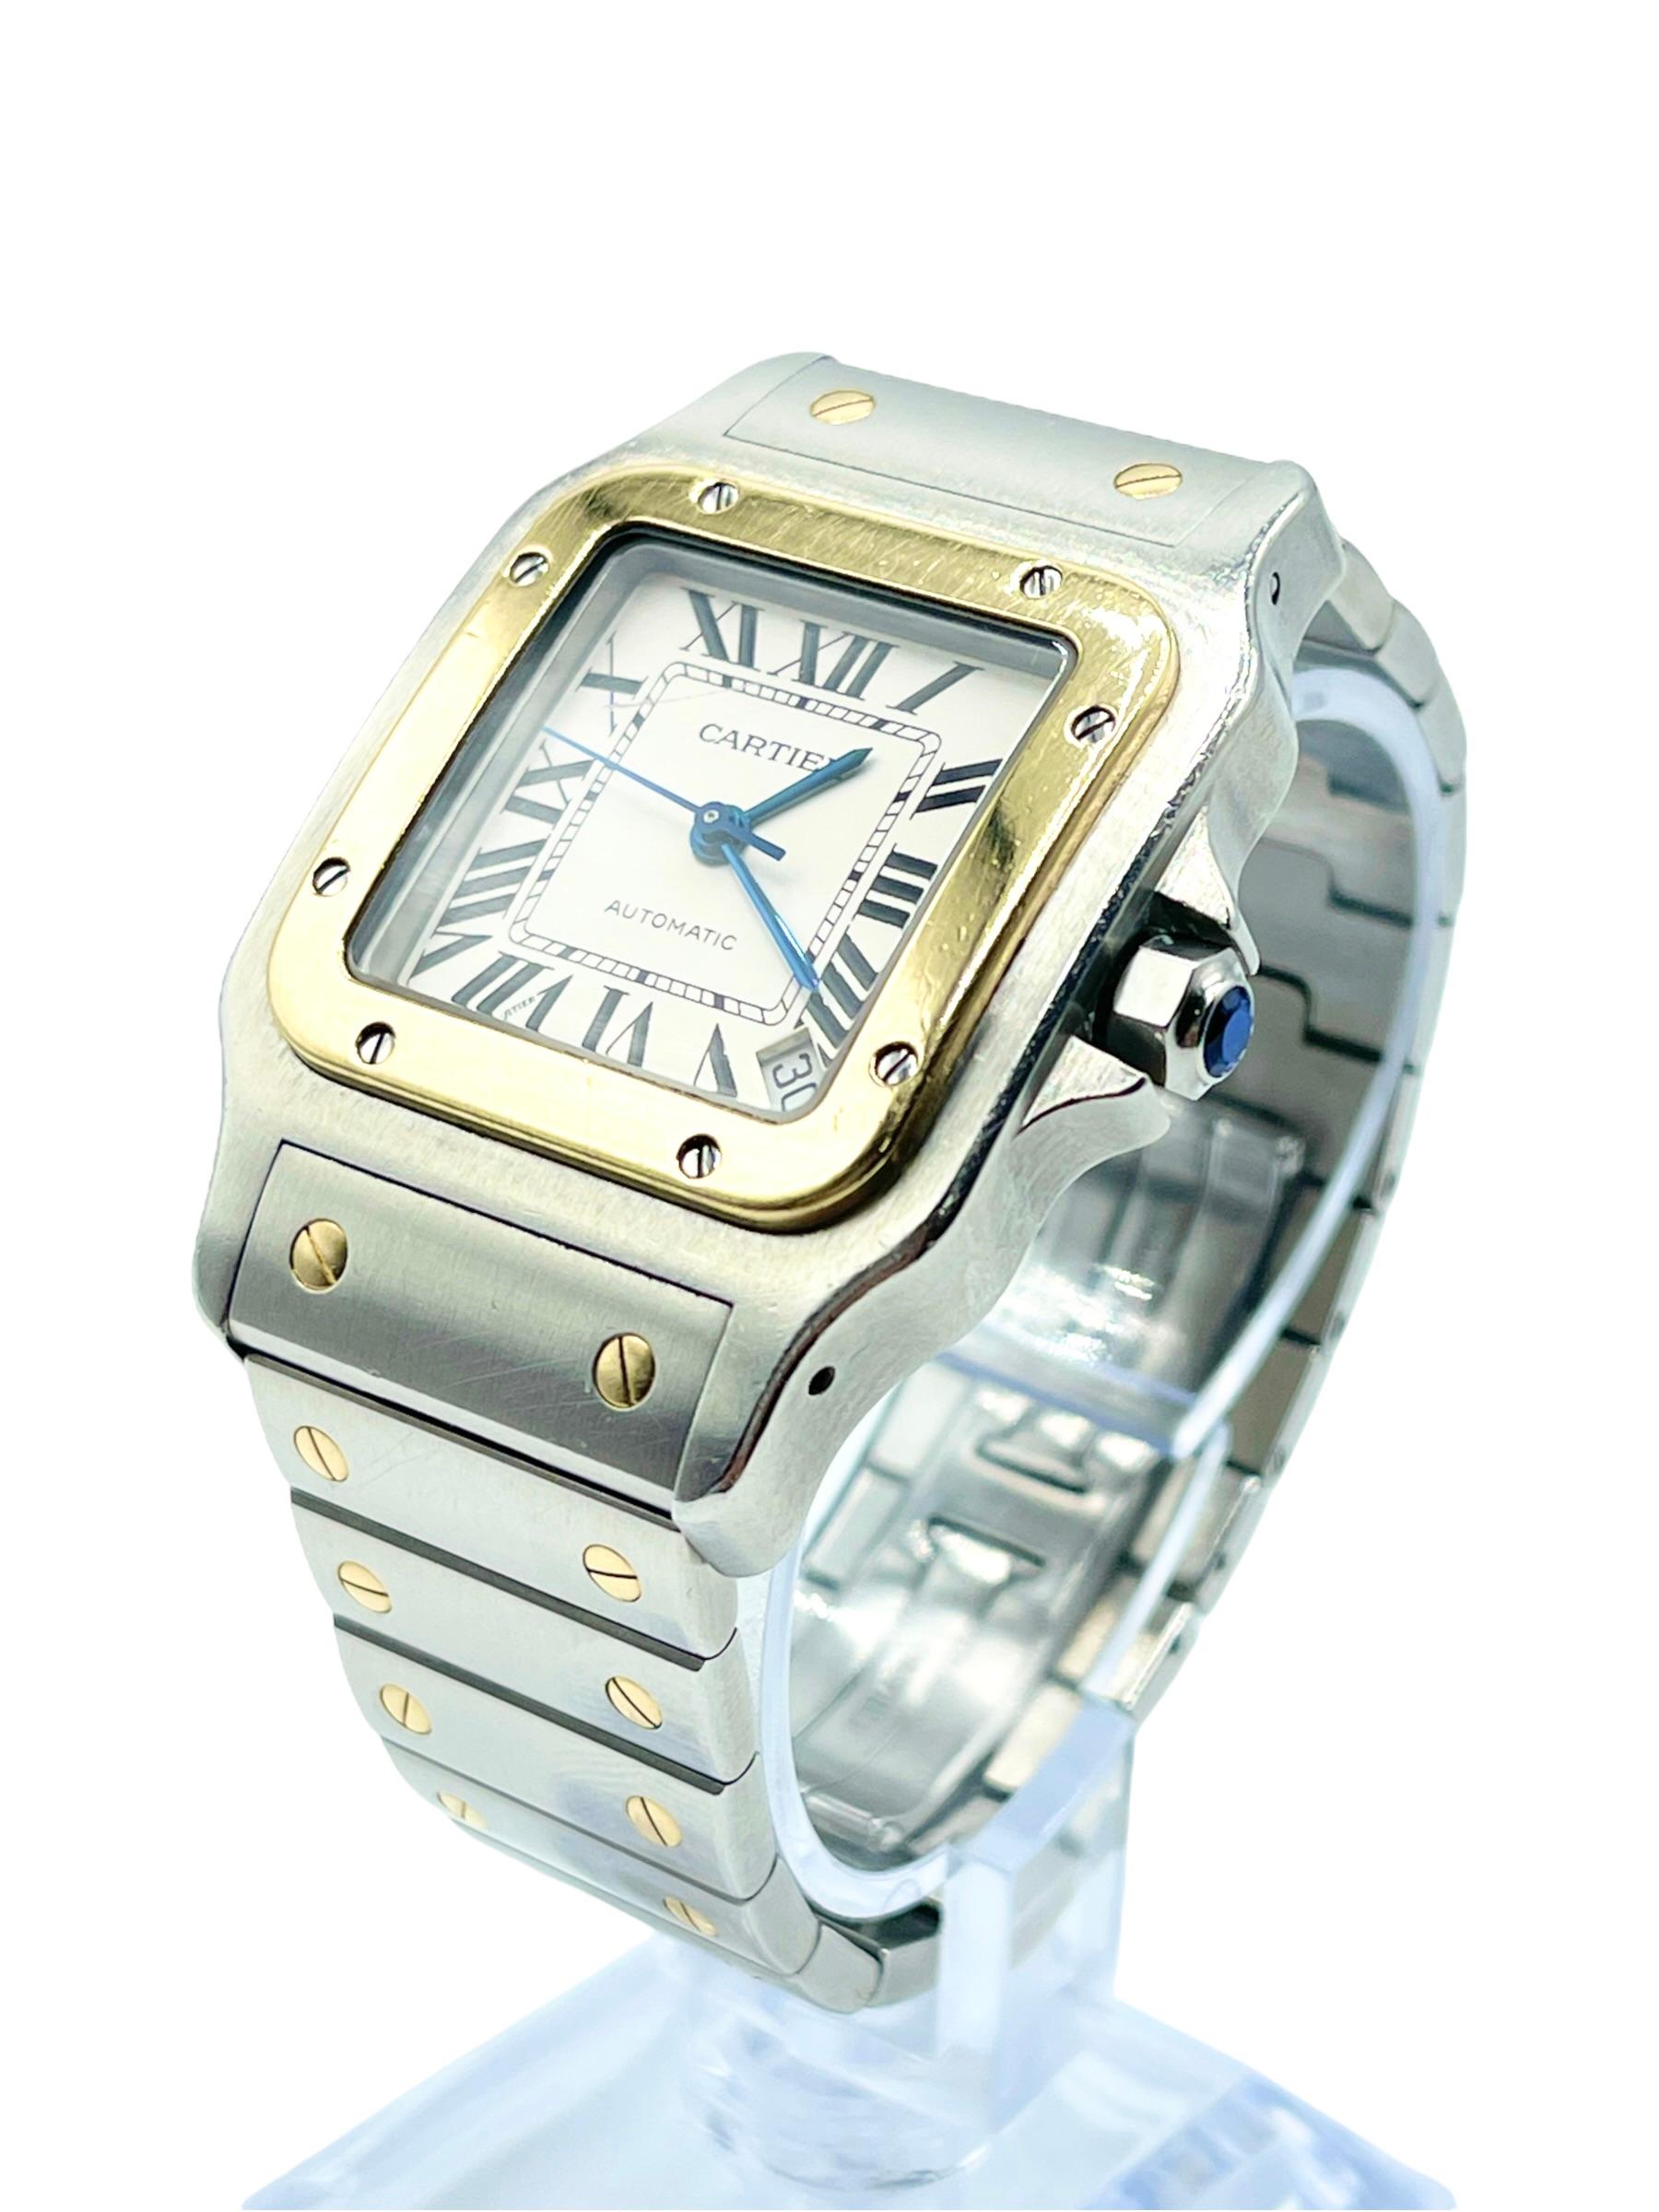 18K yellow gold bezel. White dial with blue steel hands Black Roman numeral hour markers. Minute markers around an inner dial. Date display between 4 and 5 o’clock position. 18K yellow gold & stainless-steel bracelet with hidden butterfly clasp.